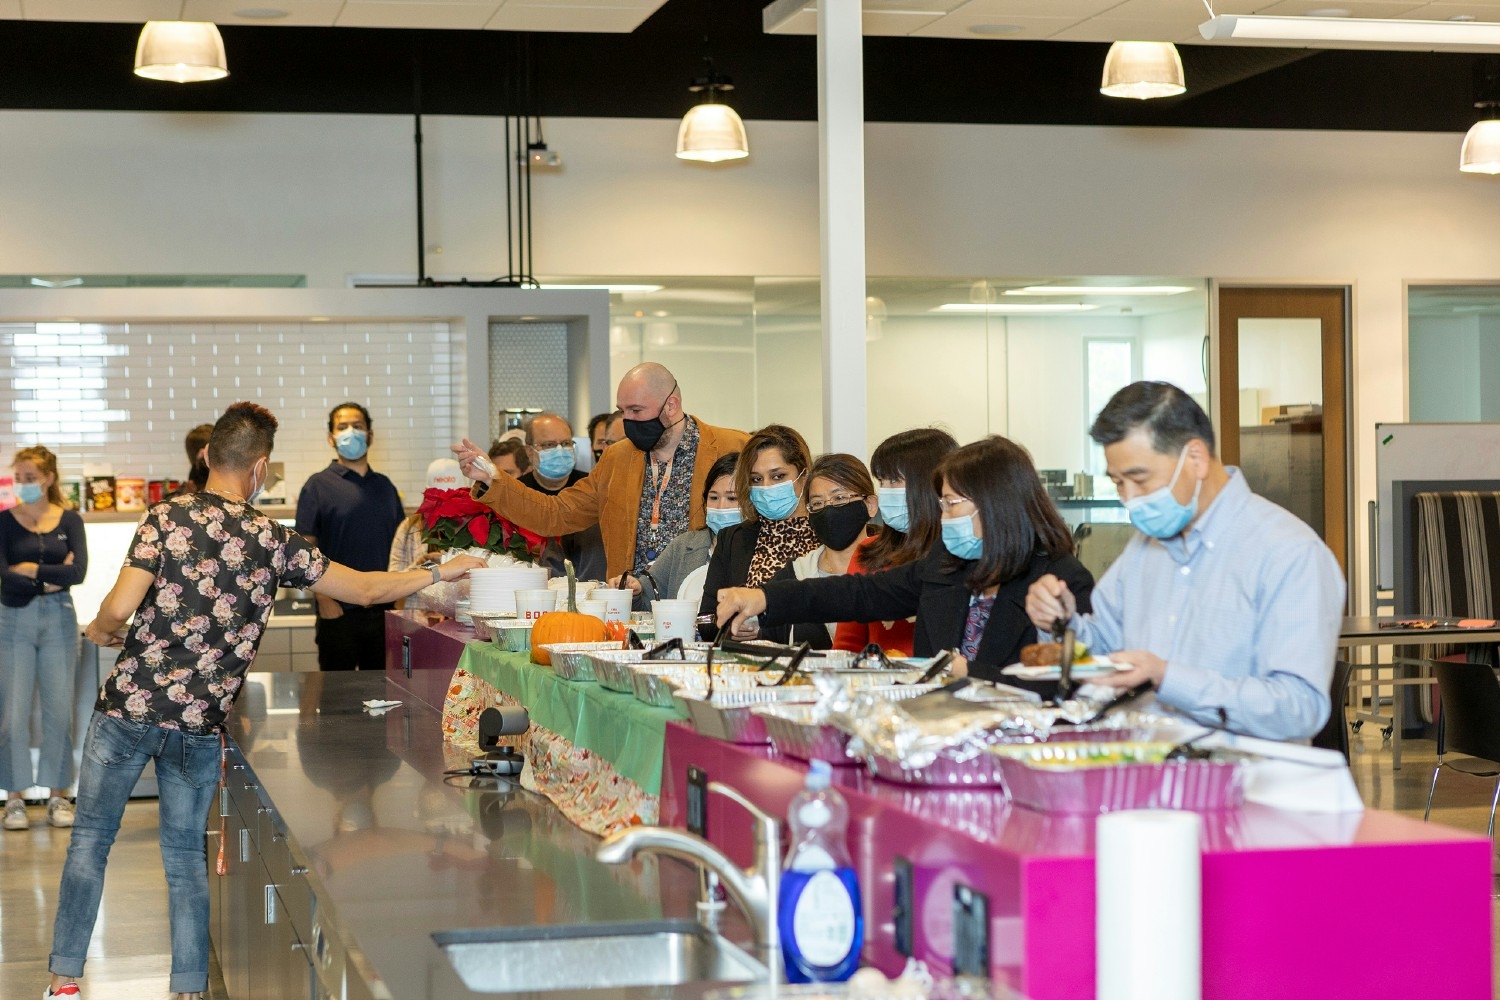 Celebrating and giving thanksgiving together during Neato's Thanksgiving potluck.